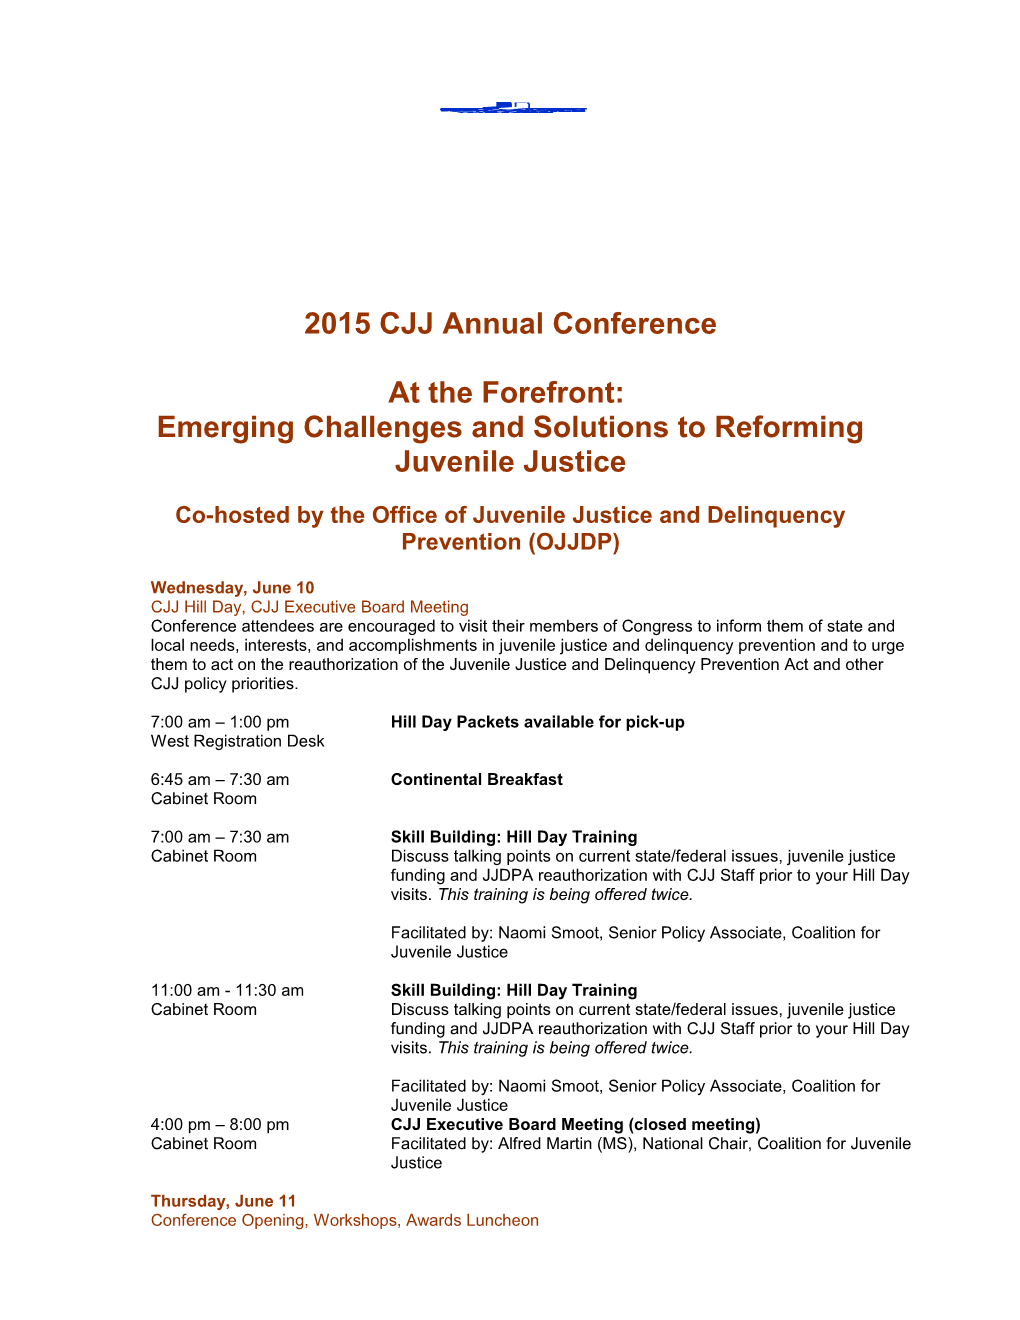 CJJ National Conference, Council Of Sags Meeting And Hill Day